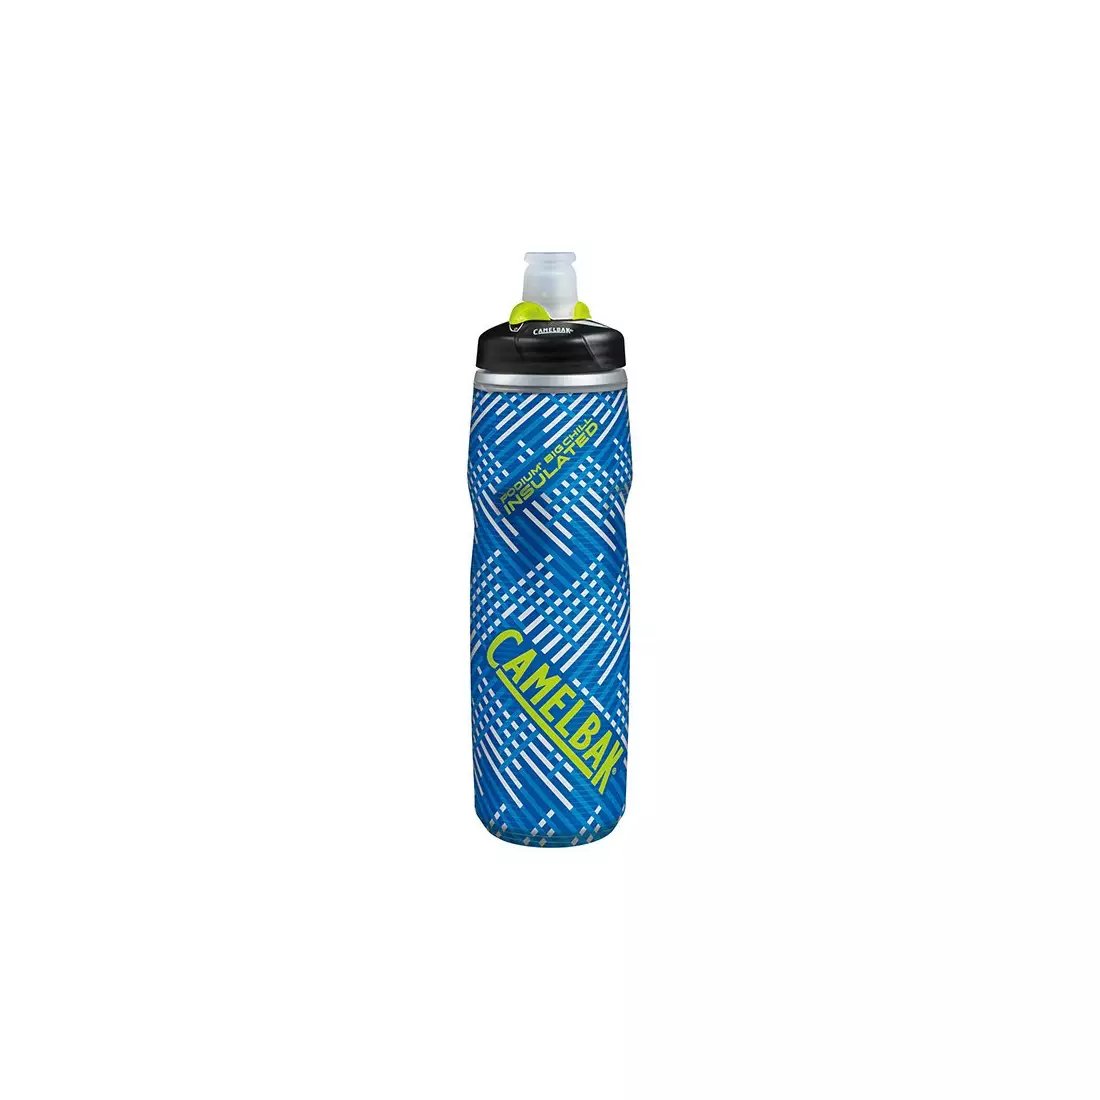 Camelbak SS18 thermal bicycle bottle Podium Big Chill 25oz/ 750 ml Cayman